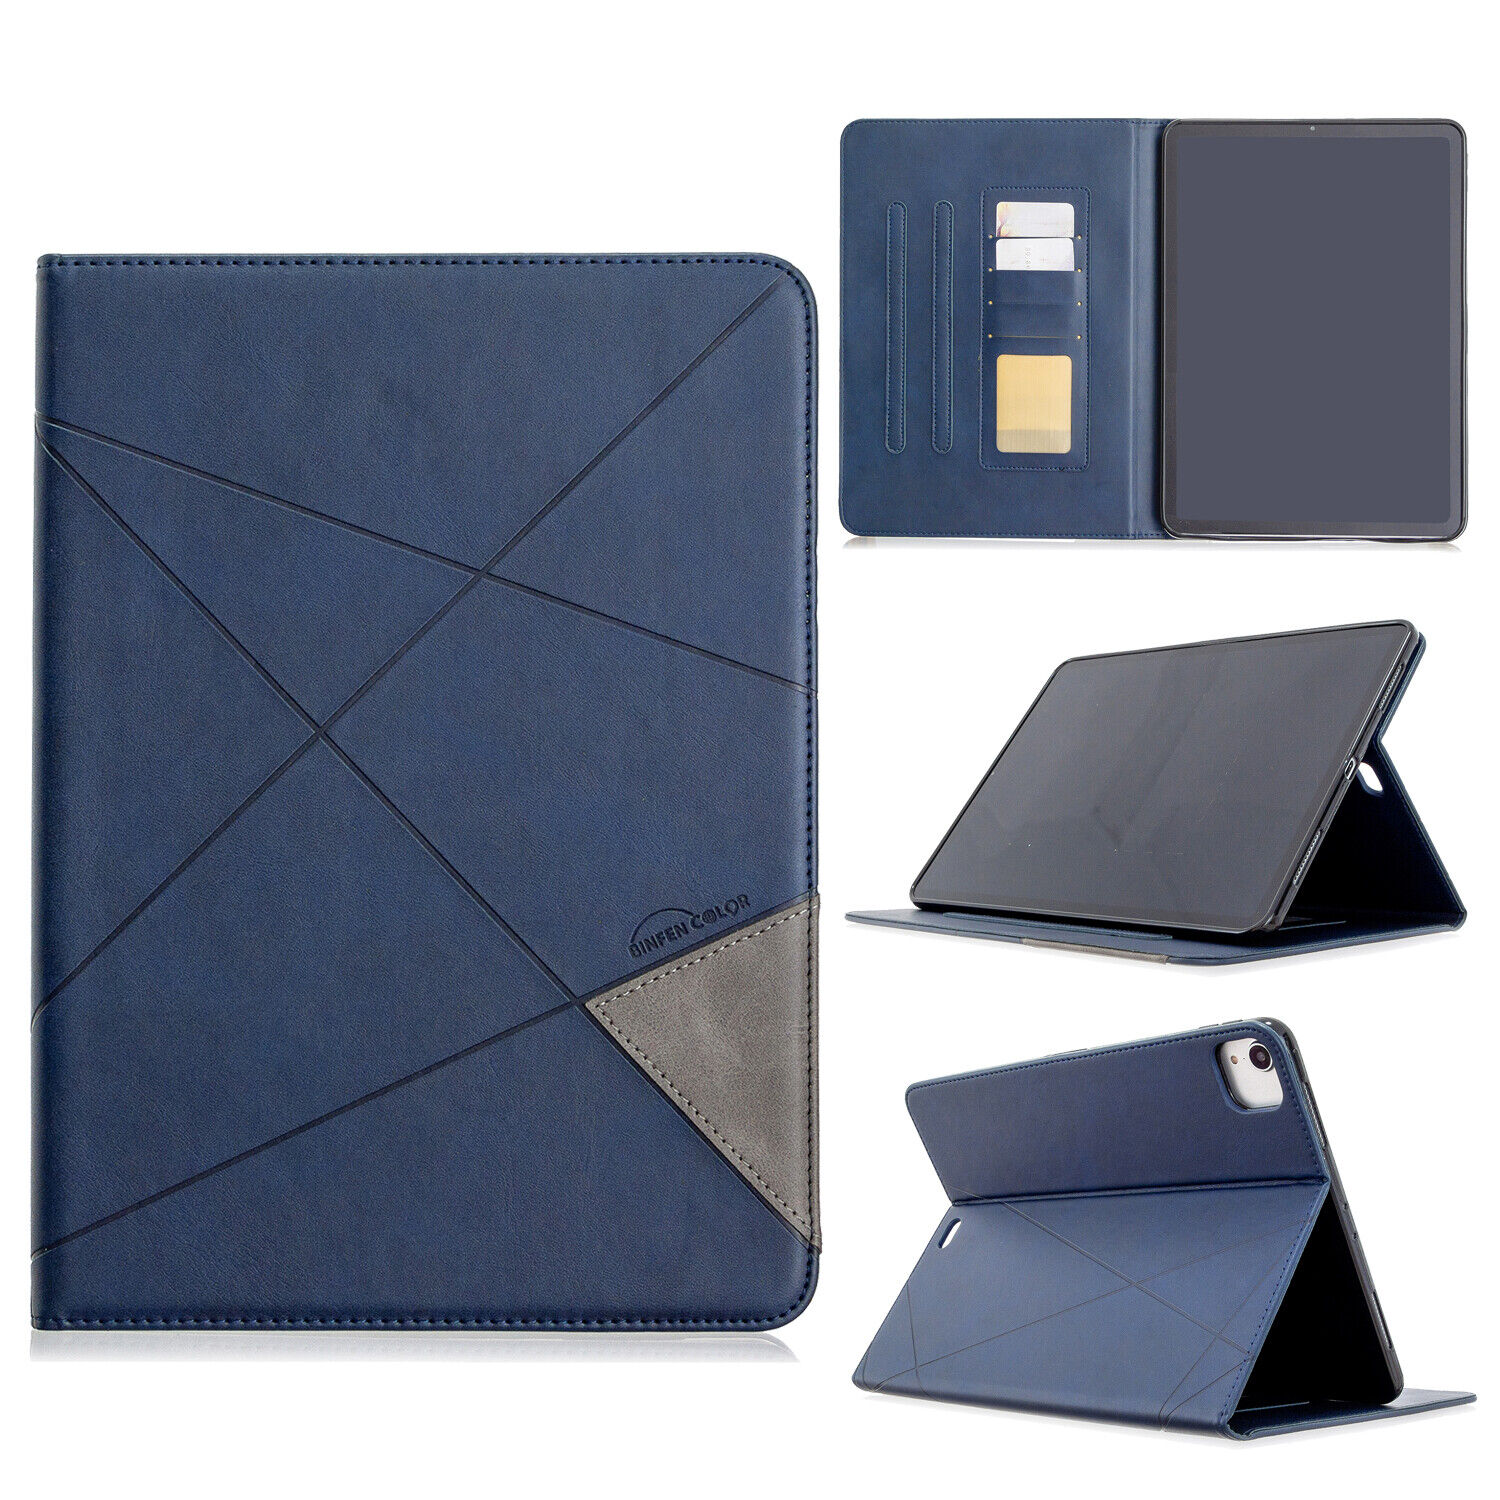 Smart Magnetic Leather Wallet Case Cover for iPad Pro 11